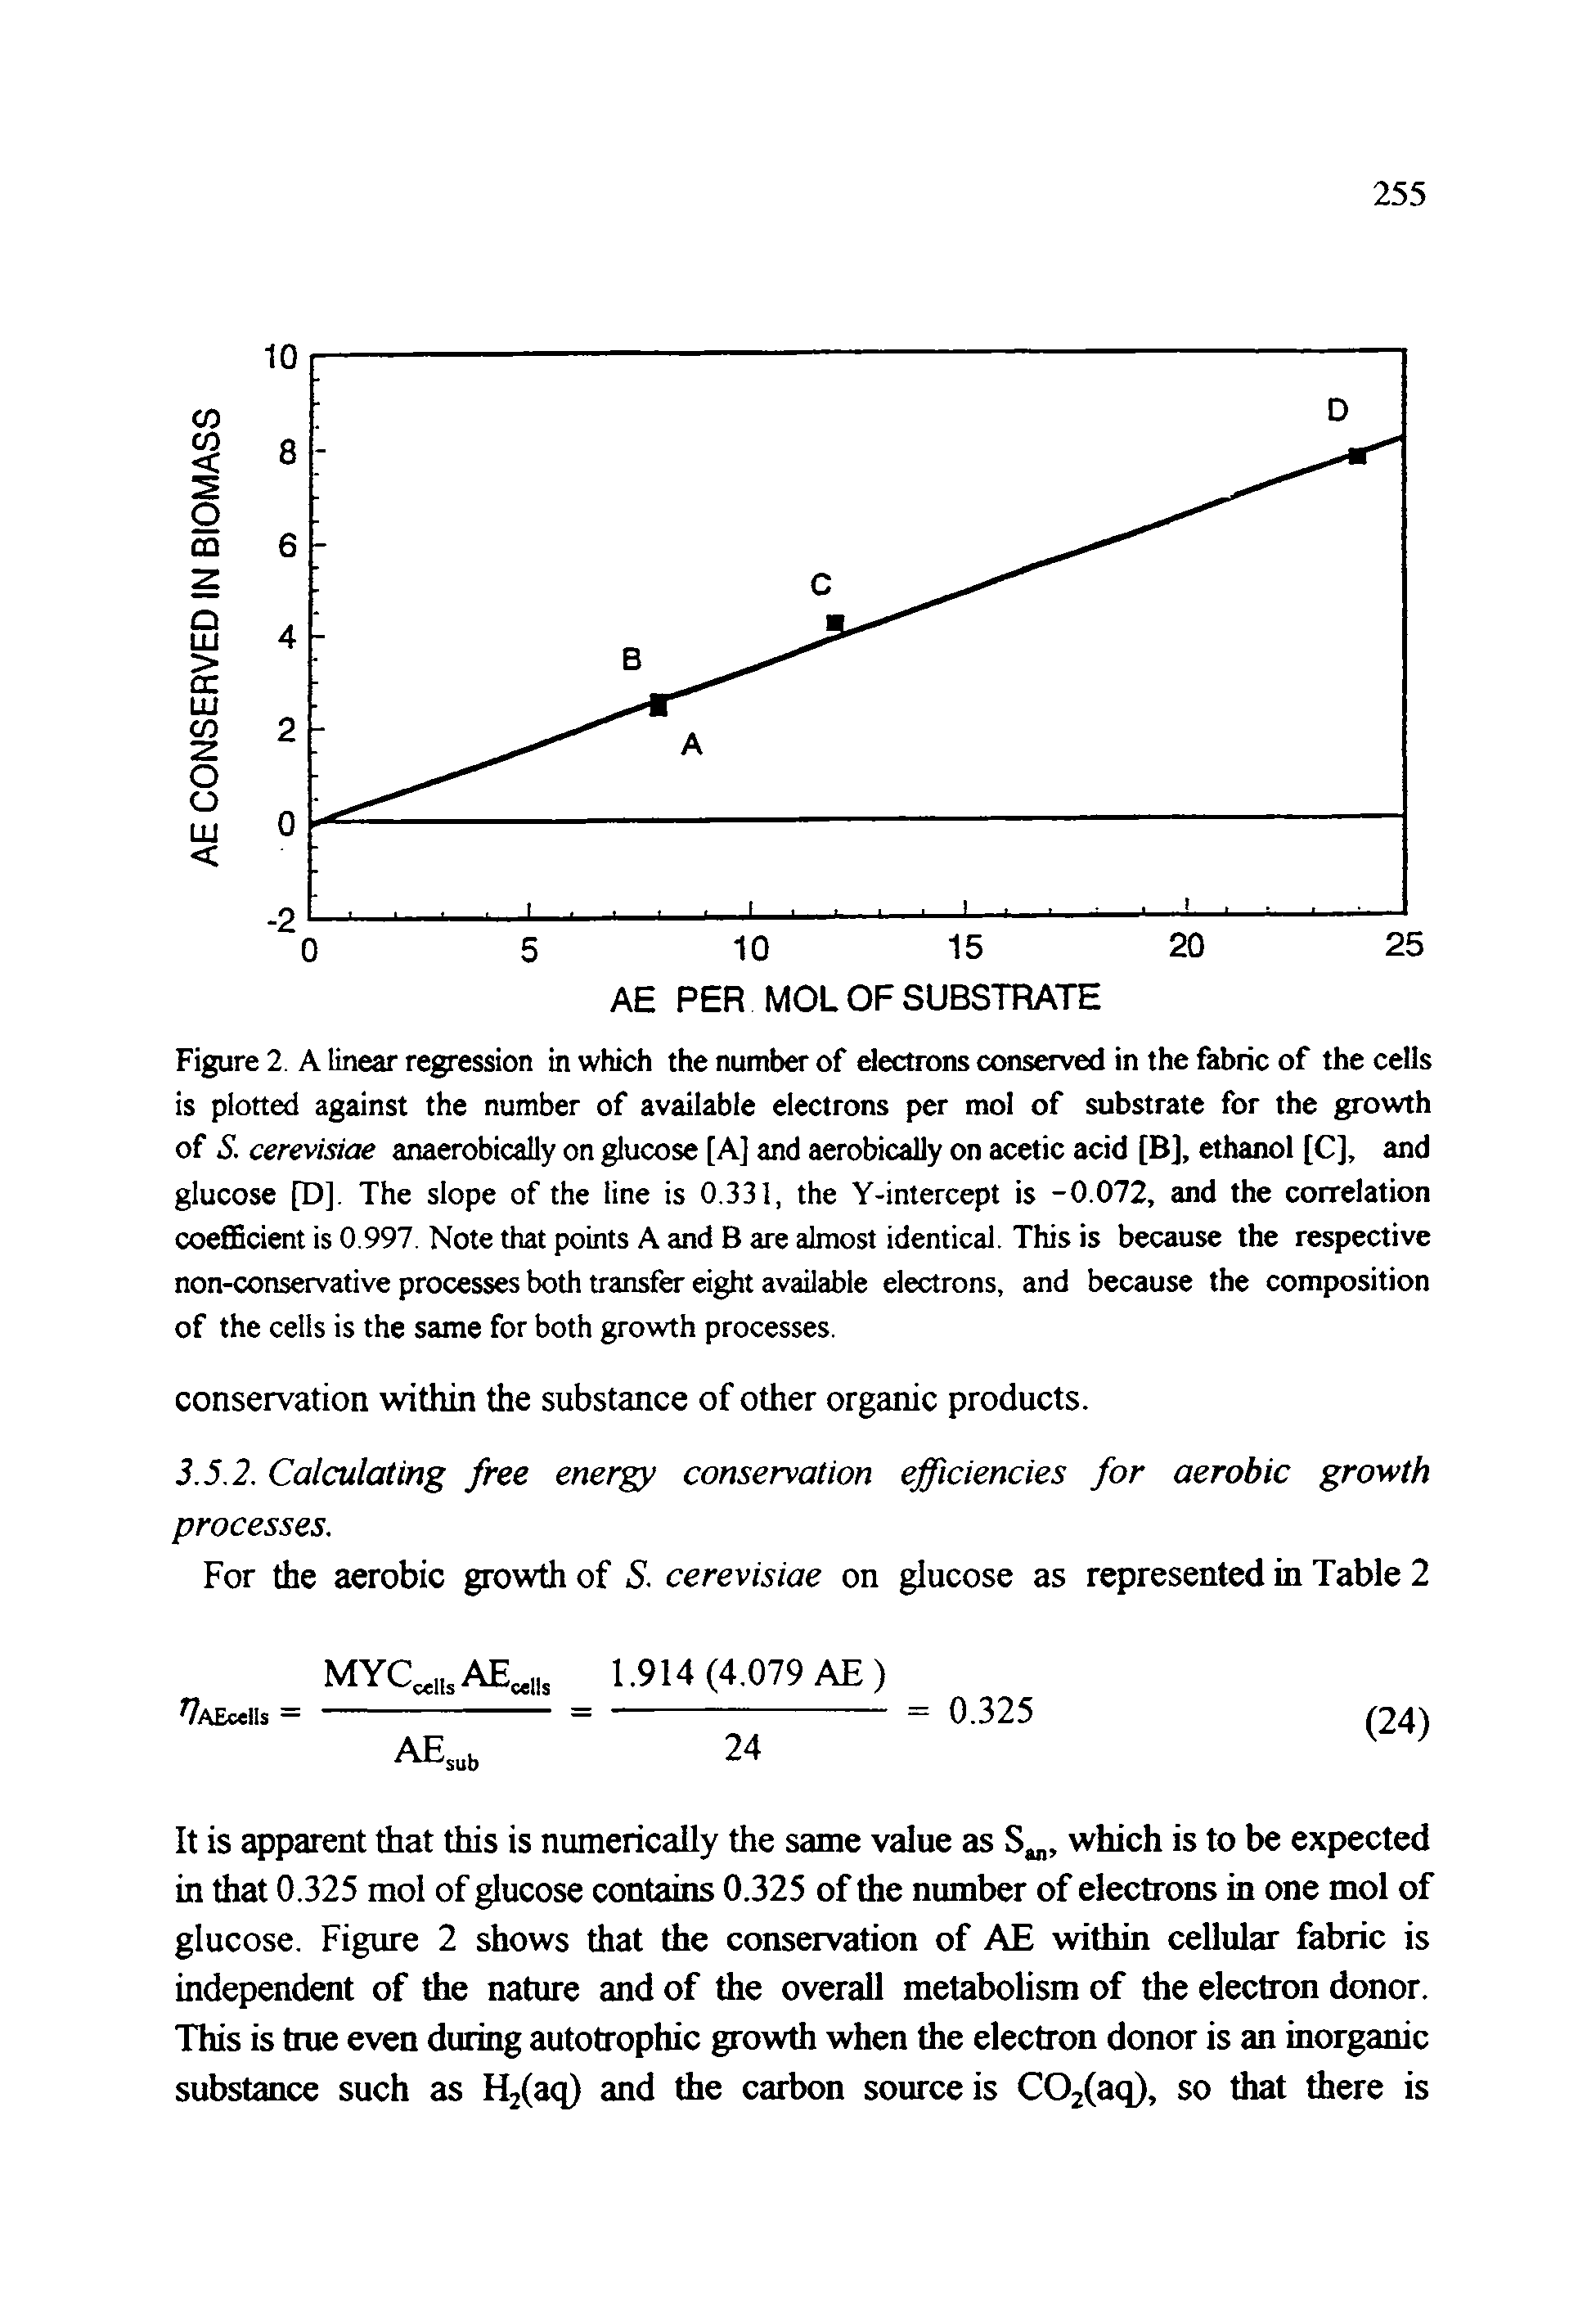 Figure 2 A linear regression in which the number of electrons conserved in the fabric of the cells is plotted against the number of available electrons per mol of substrate for the growth of S. cerevisiae anaerobically on glucose [A] and aerobically on acetic acid [B], ethanol [C], and glucose [D]. The slope of the line is 0.331, the Y-intercept is -0.072, and the correlation coeflBcient is 0.997. Note that points A and B are almost identical. This is because the respective non-conservative processes both transfer eight available electrons, and because the composition of the cells is the same for both growth processes.